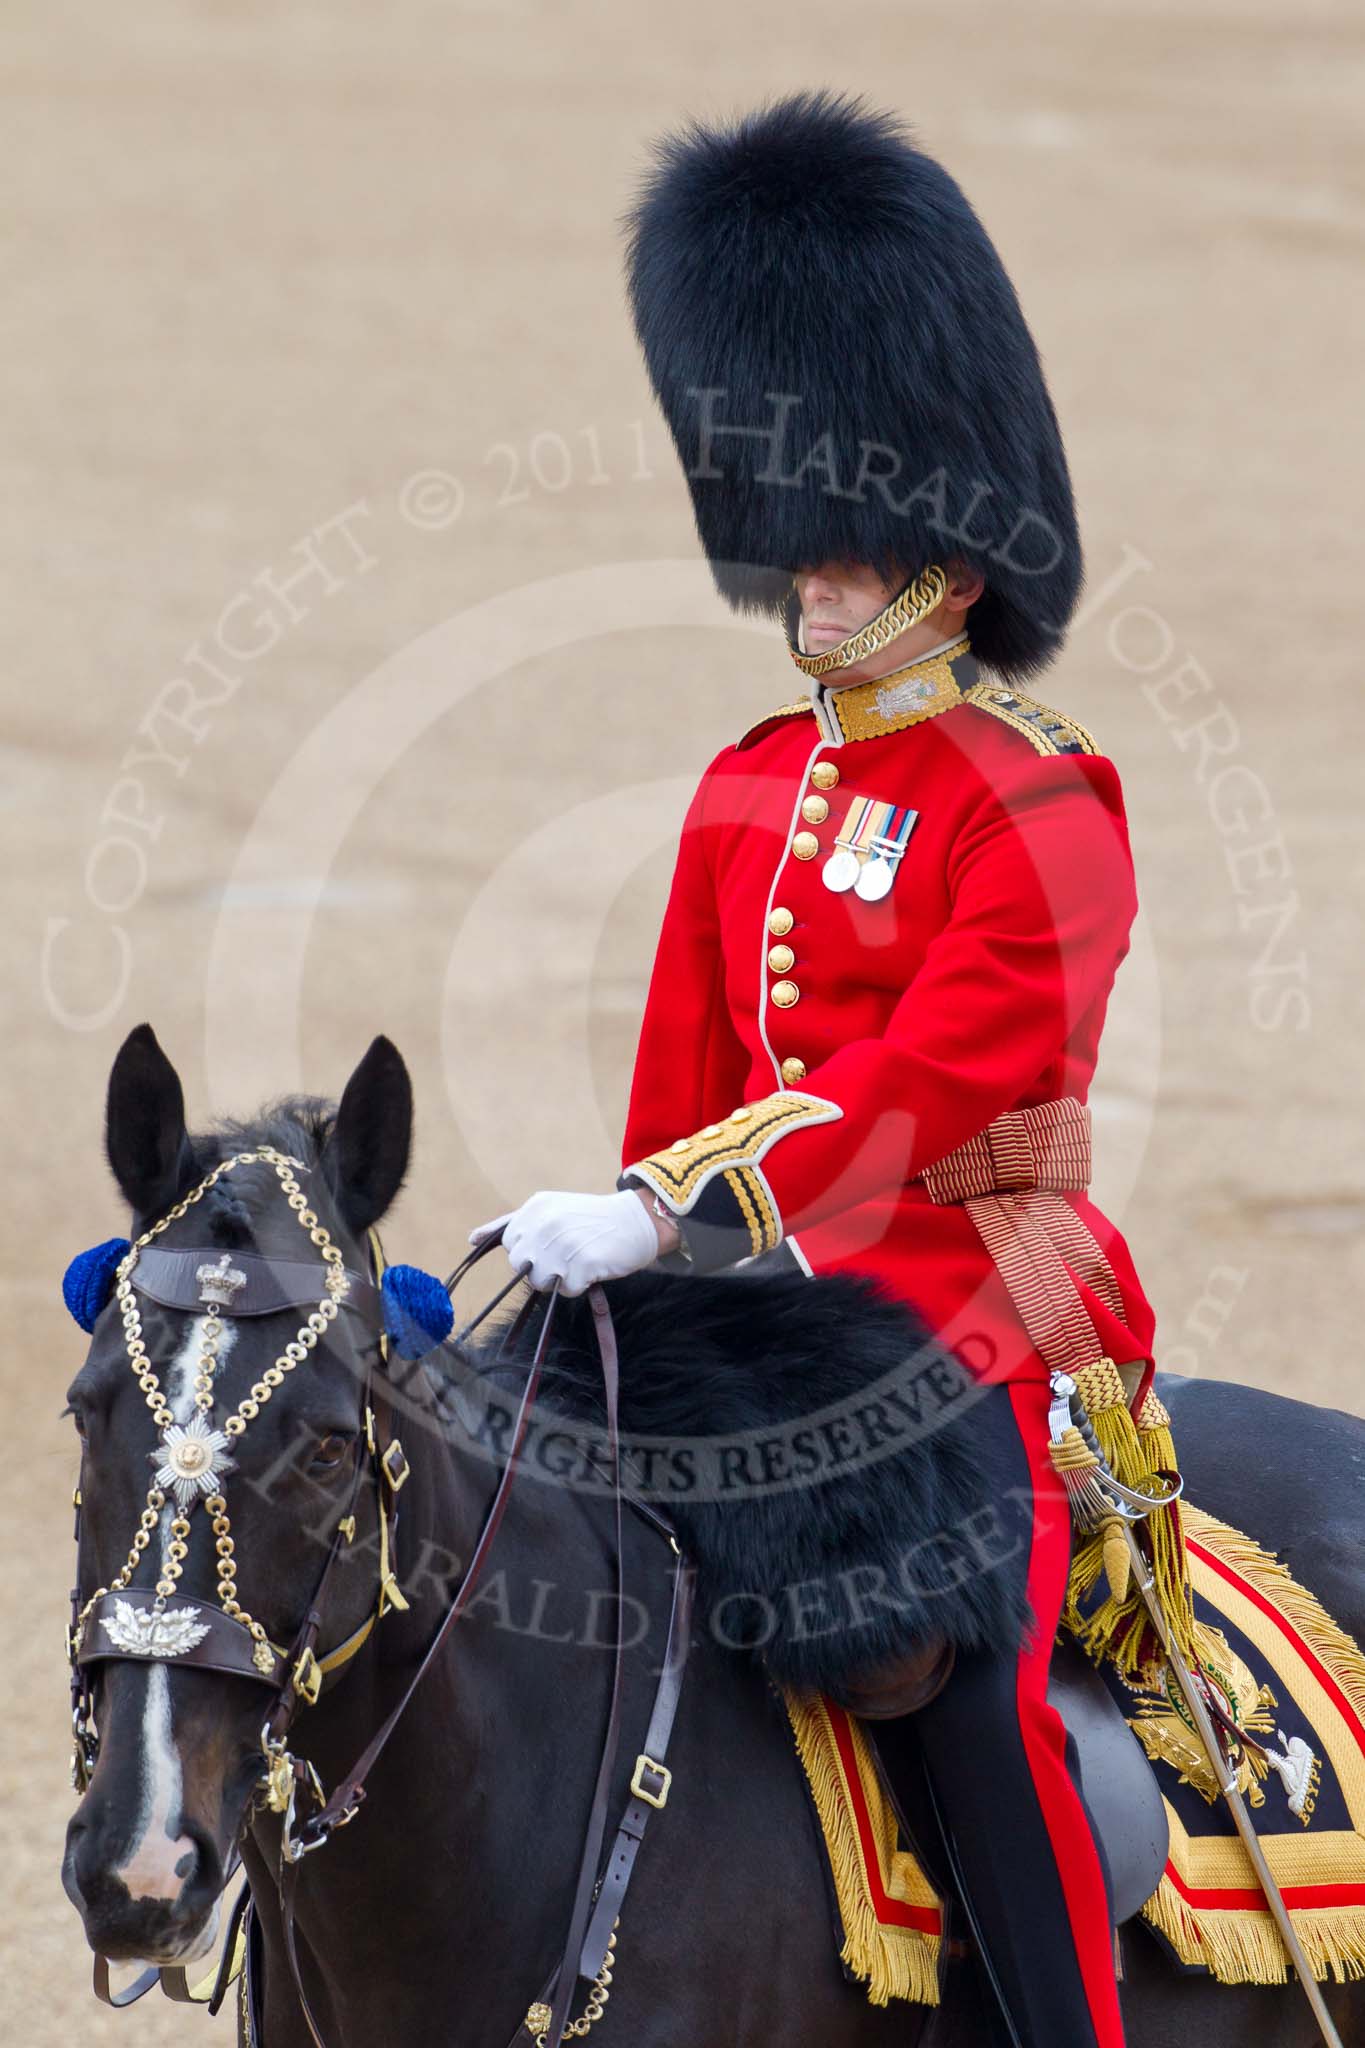 Trooping the Colour 2011: The Adjutant of the Parade, Captain Hamish N C Barne, 1st Battalion Scots Guards and Adjutant of the 1st Battalion..
Horse Guards Parade, Westminster,
London SW1,
Greater London,
United Kingdom,
on 11 June 2011 at 10:39, image #66